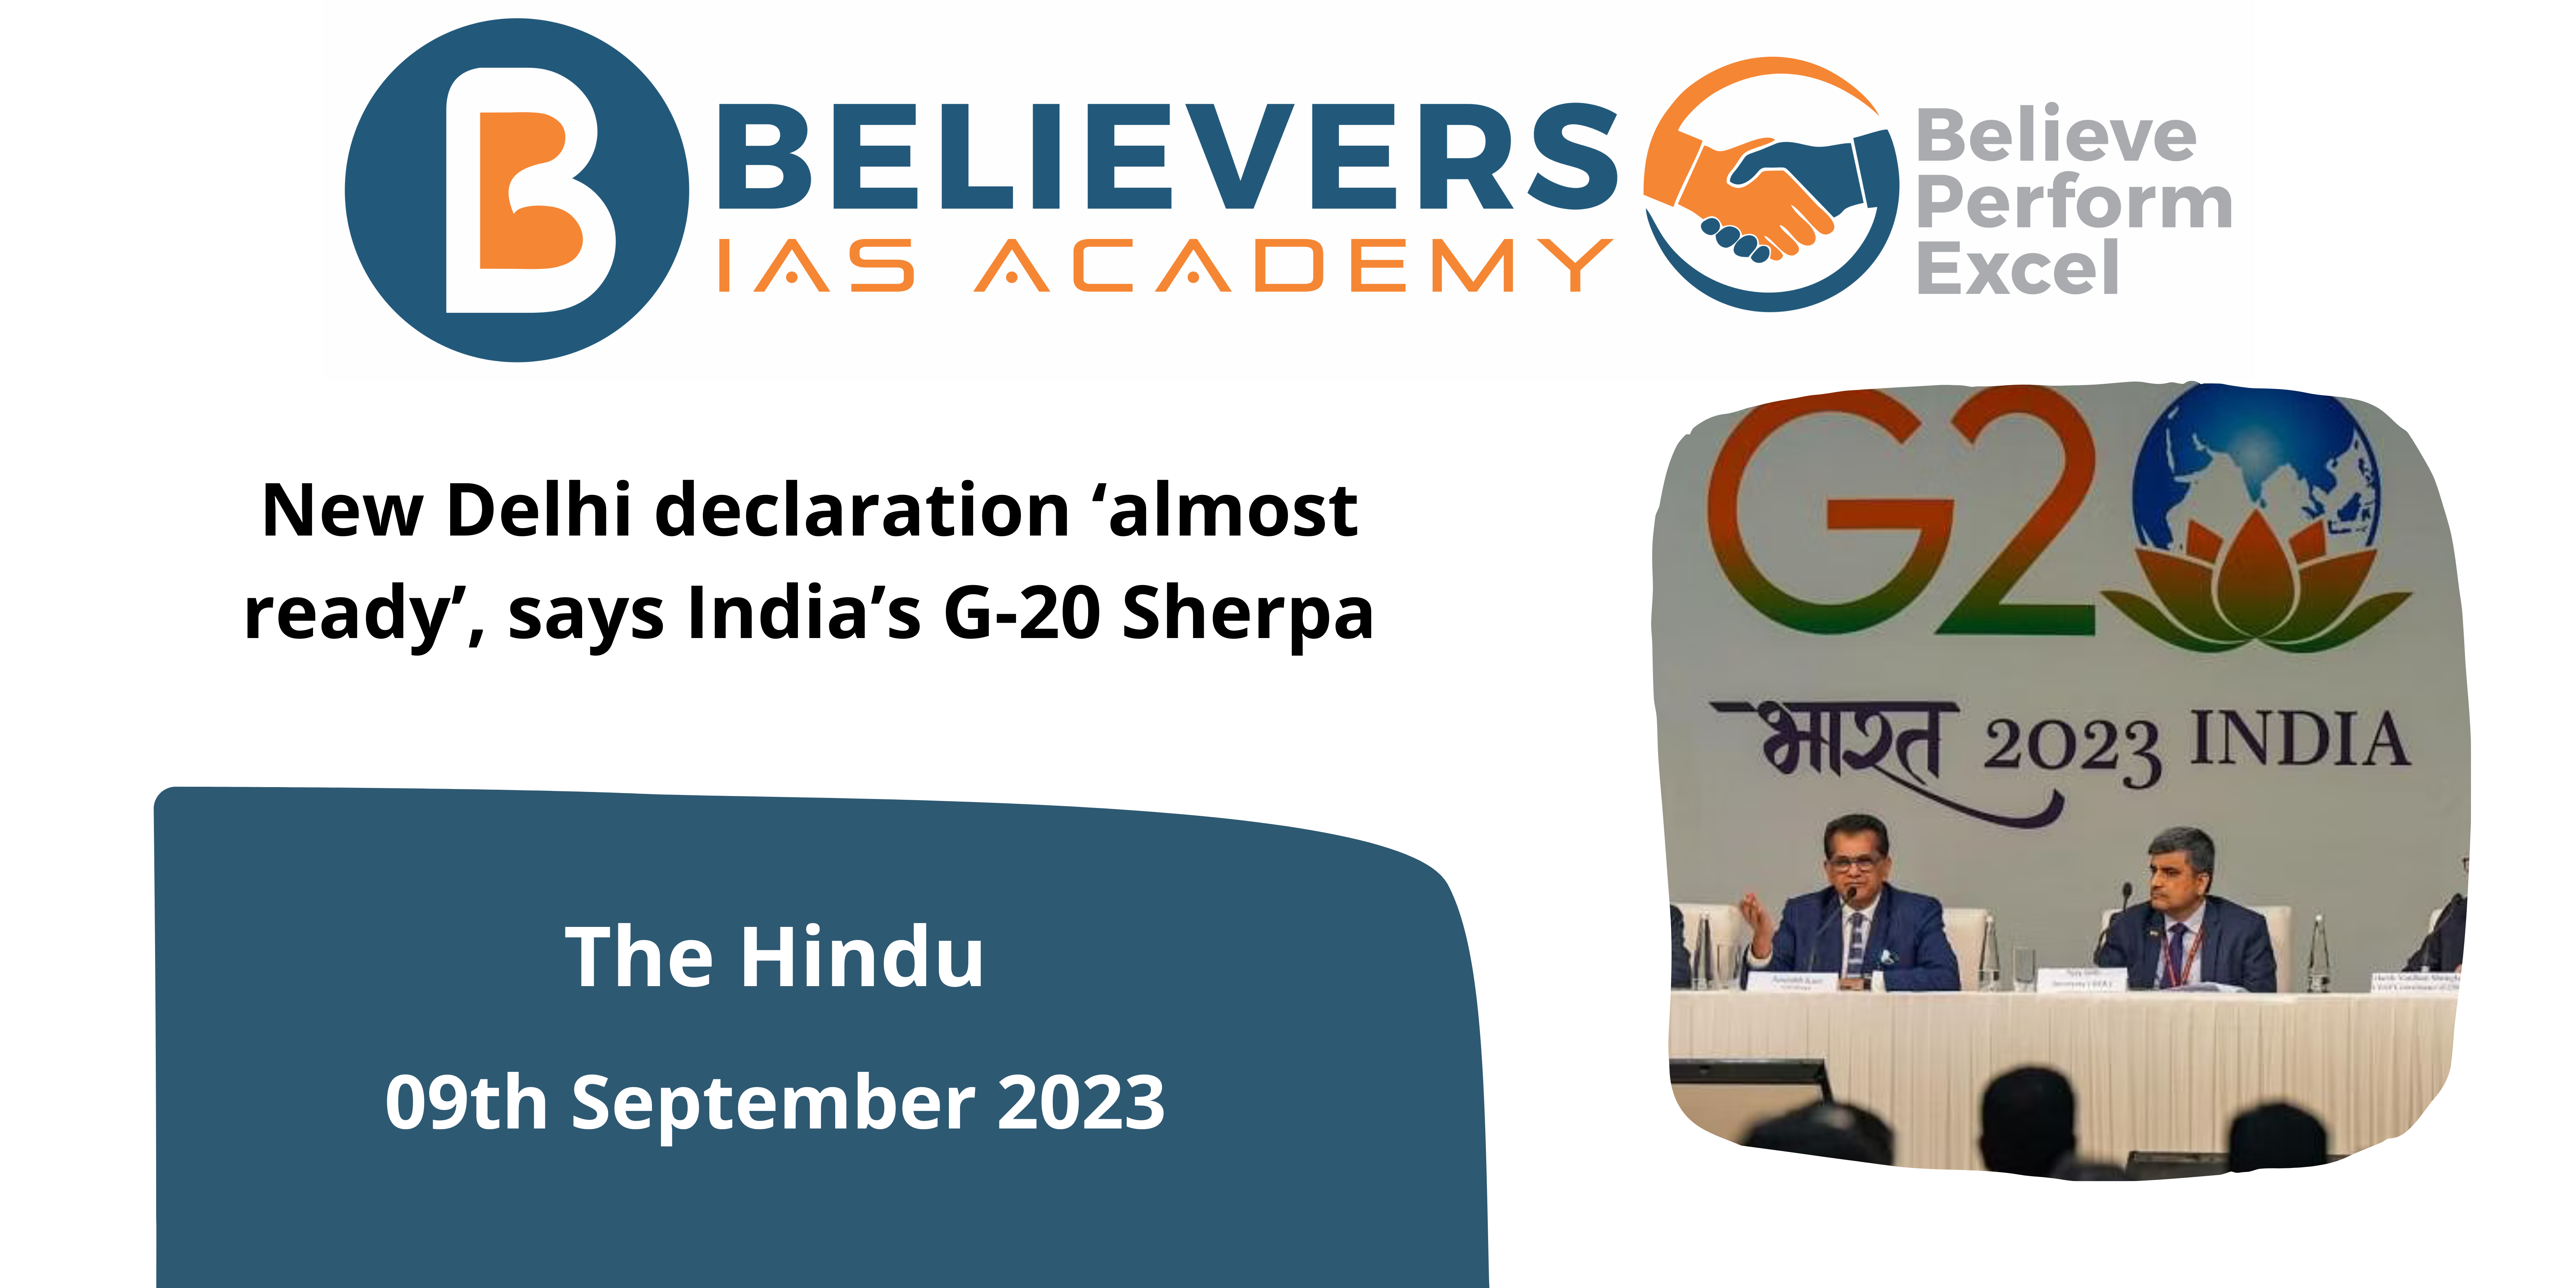 New Delhi declaration ‘almost ready’, says India’s G-20 Sherpa